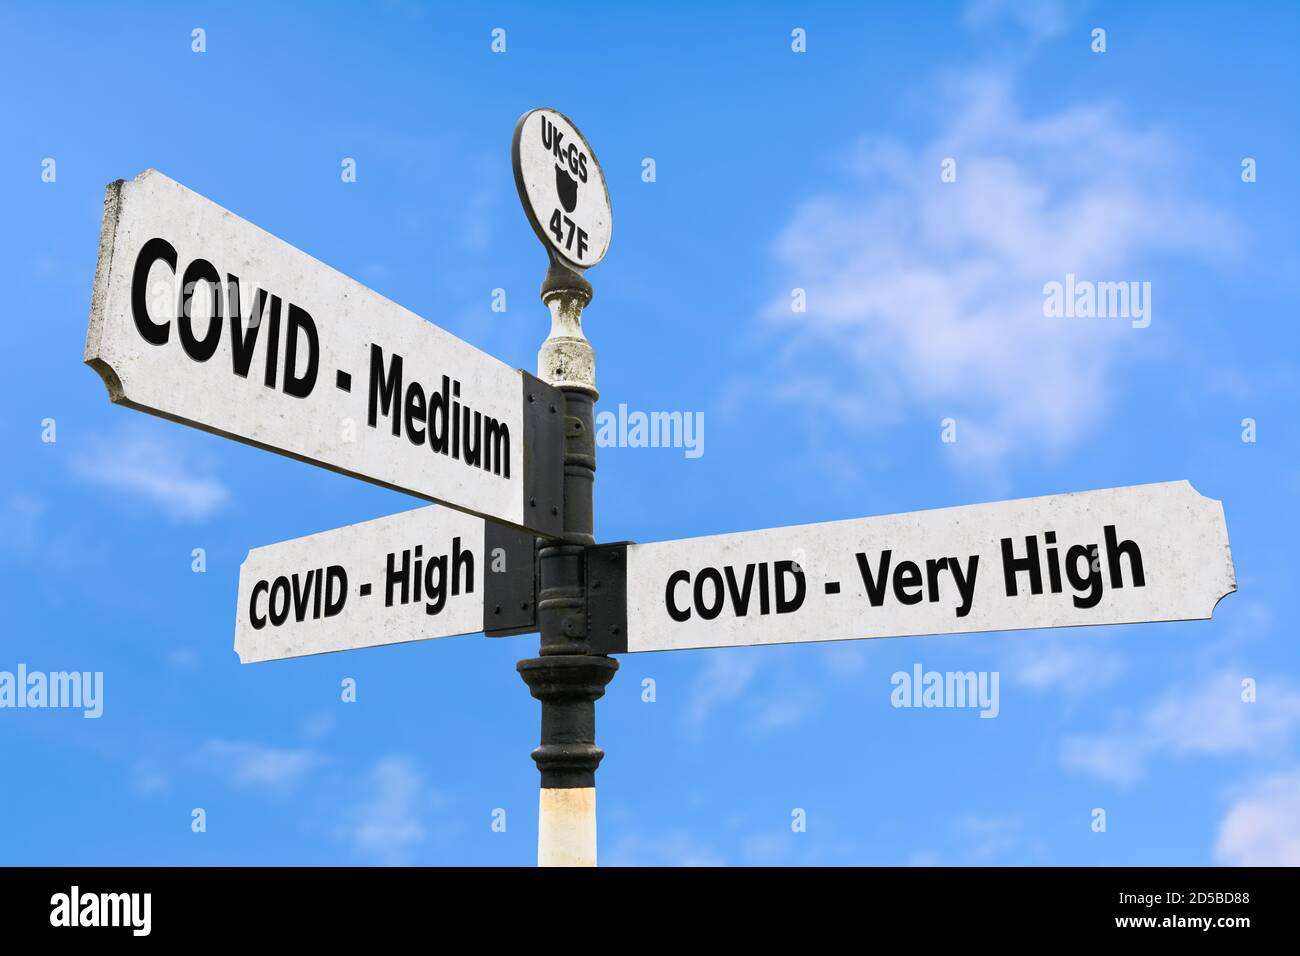 Illustration of a direction sign or finger post showing alert level tiers for local restrictions due to coronavirus COVID19 pandemic in the UK. Stock Photo